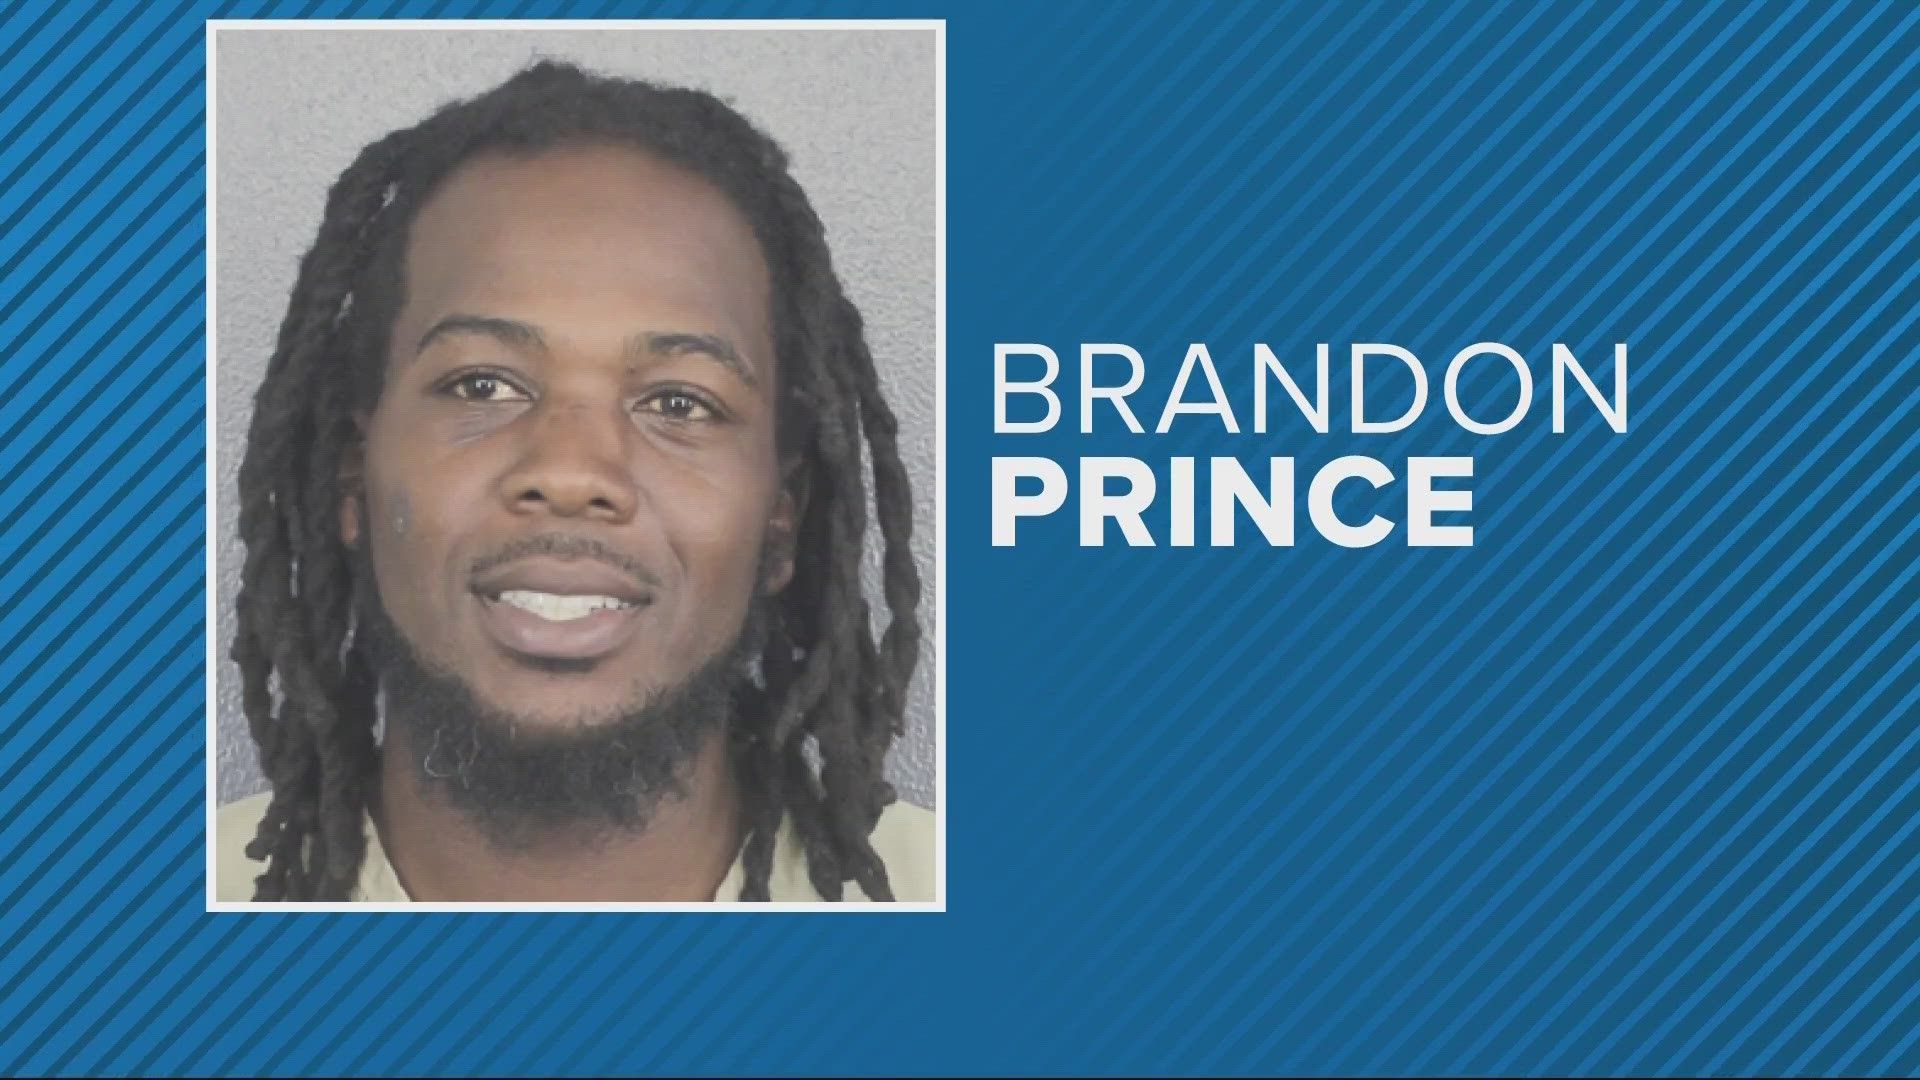 Police say both brothers were involved. Zonchez Prince was shot and killed in Clay County when police tried to arrest him. Brandon Prince was arrested Sunday.